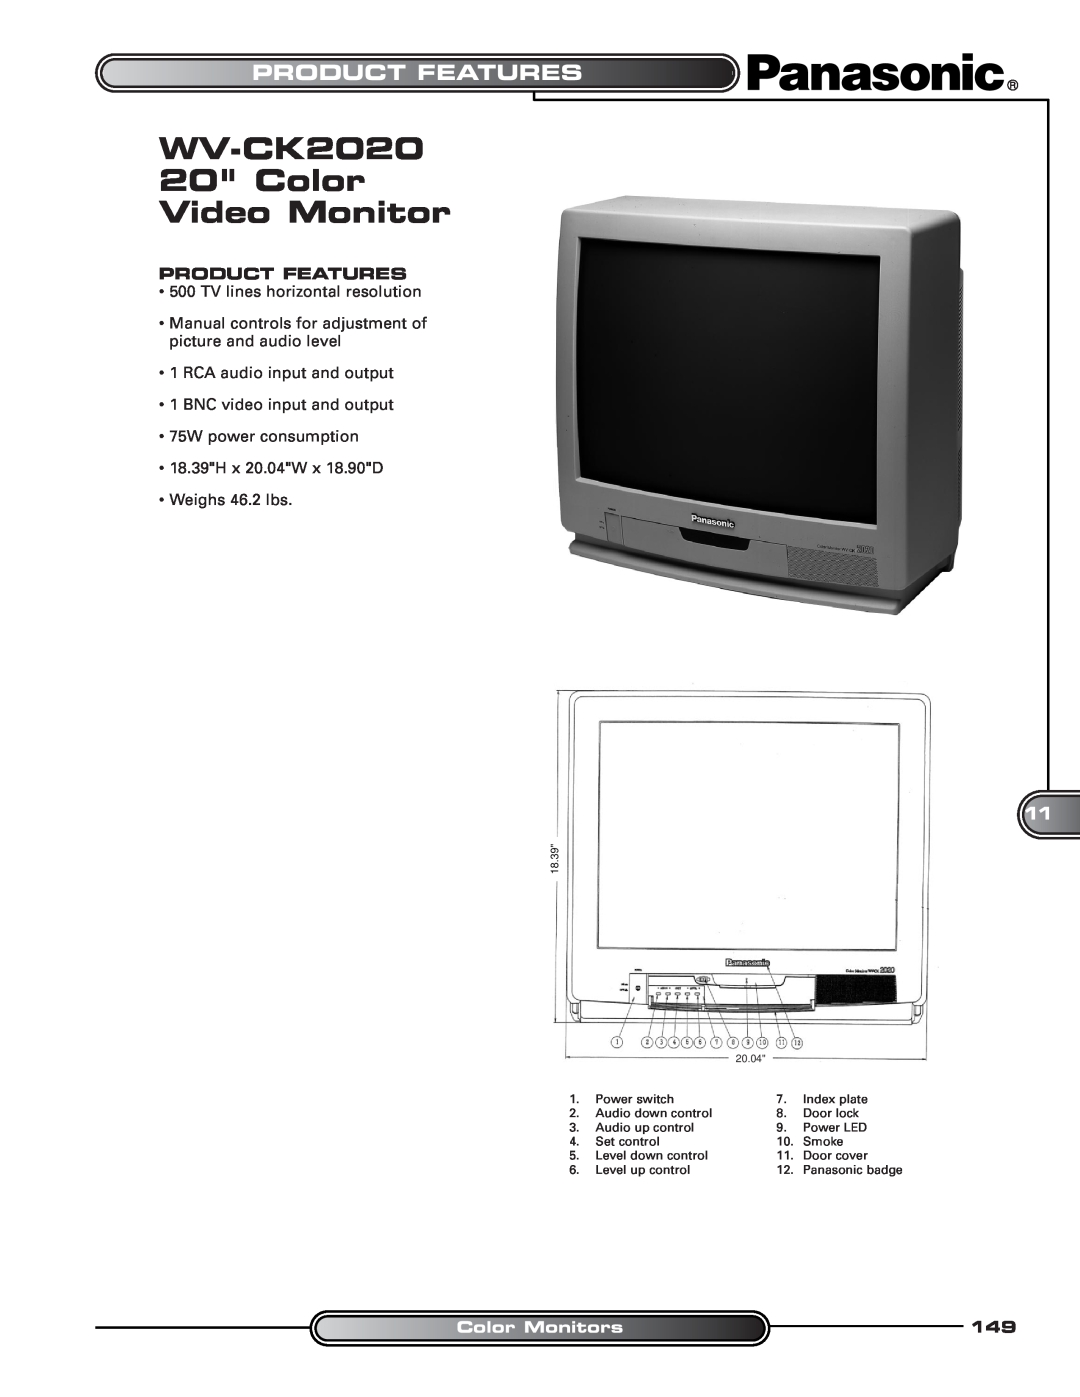 Panasonic manual Product Features, ColorMonitors, WV-CK2020 20 Color Video Monitor 